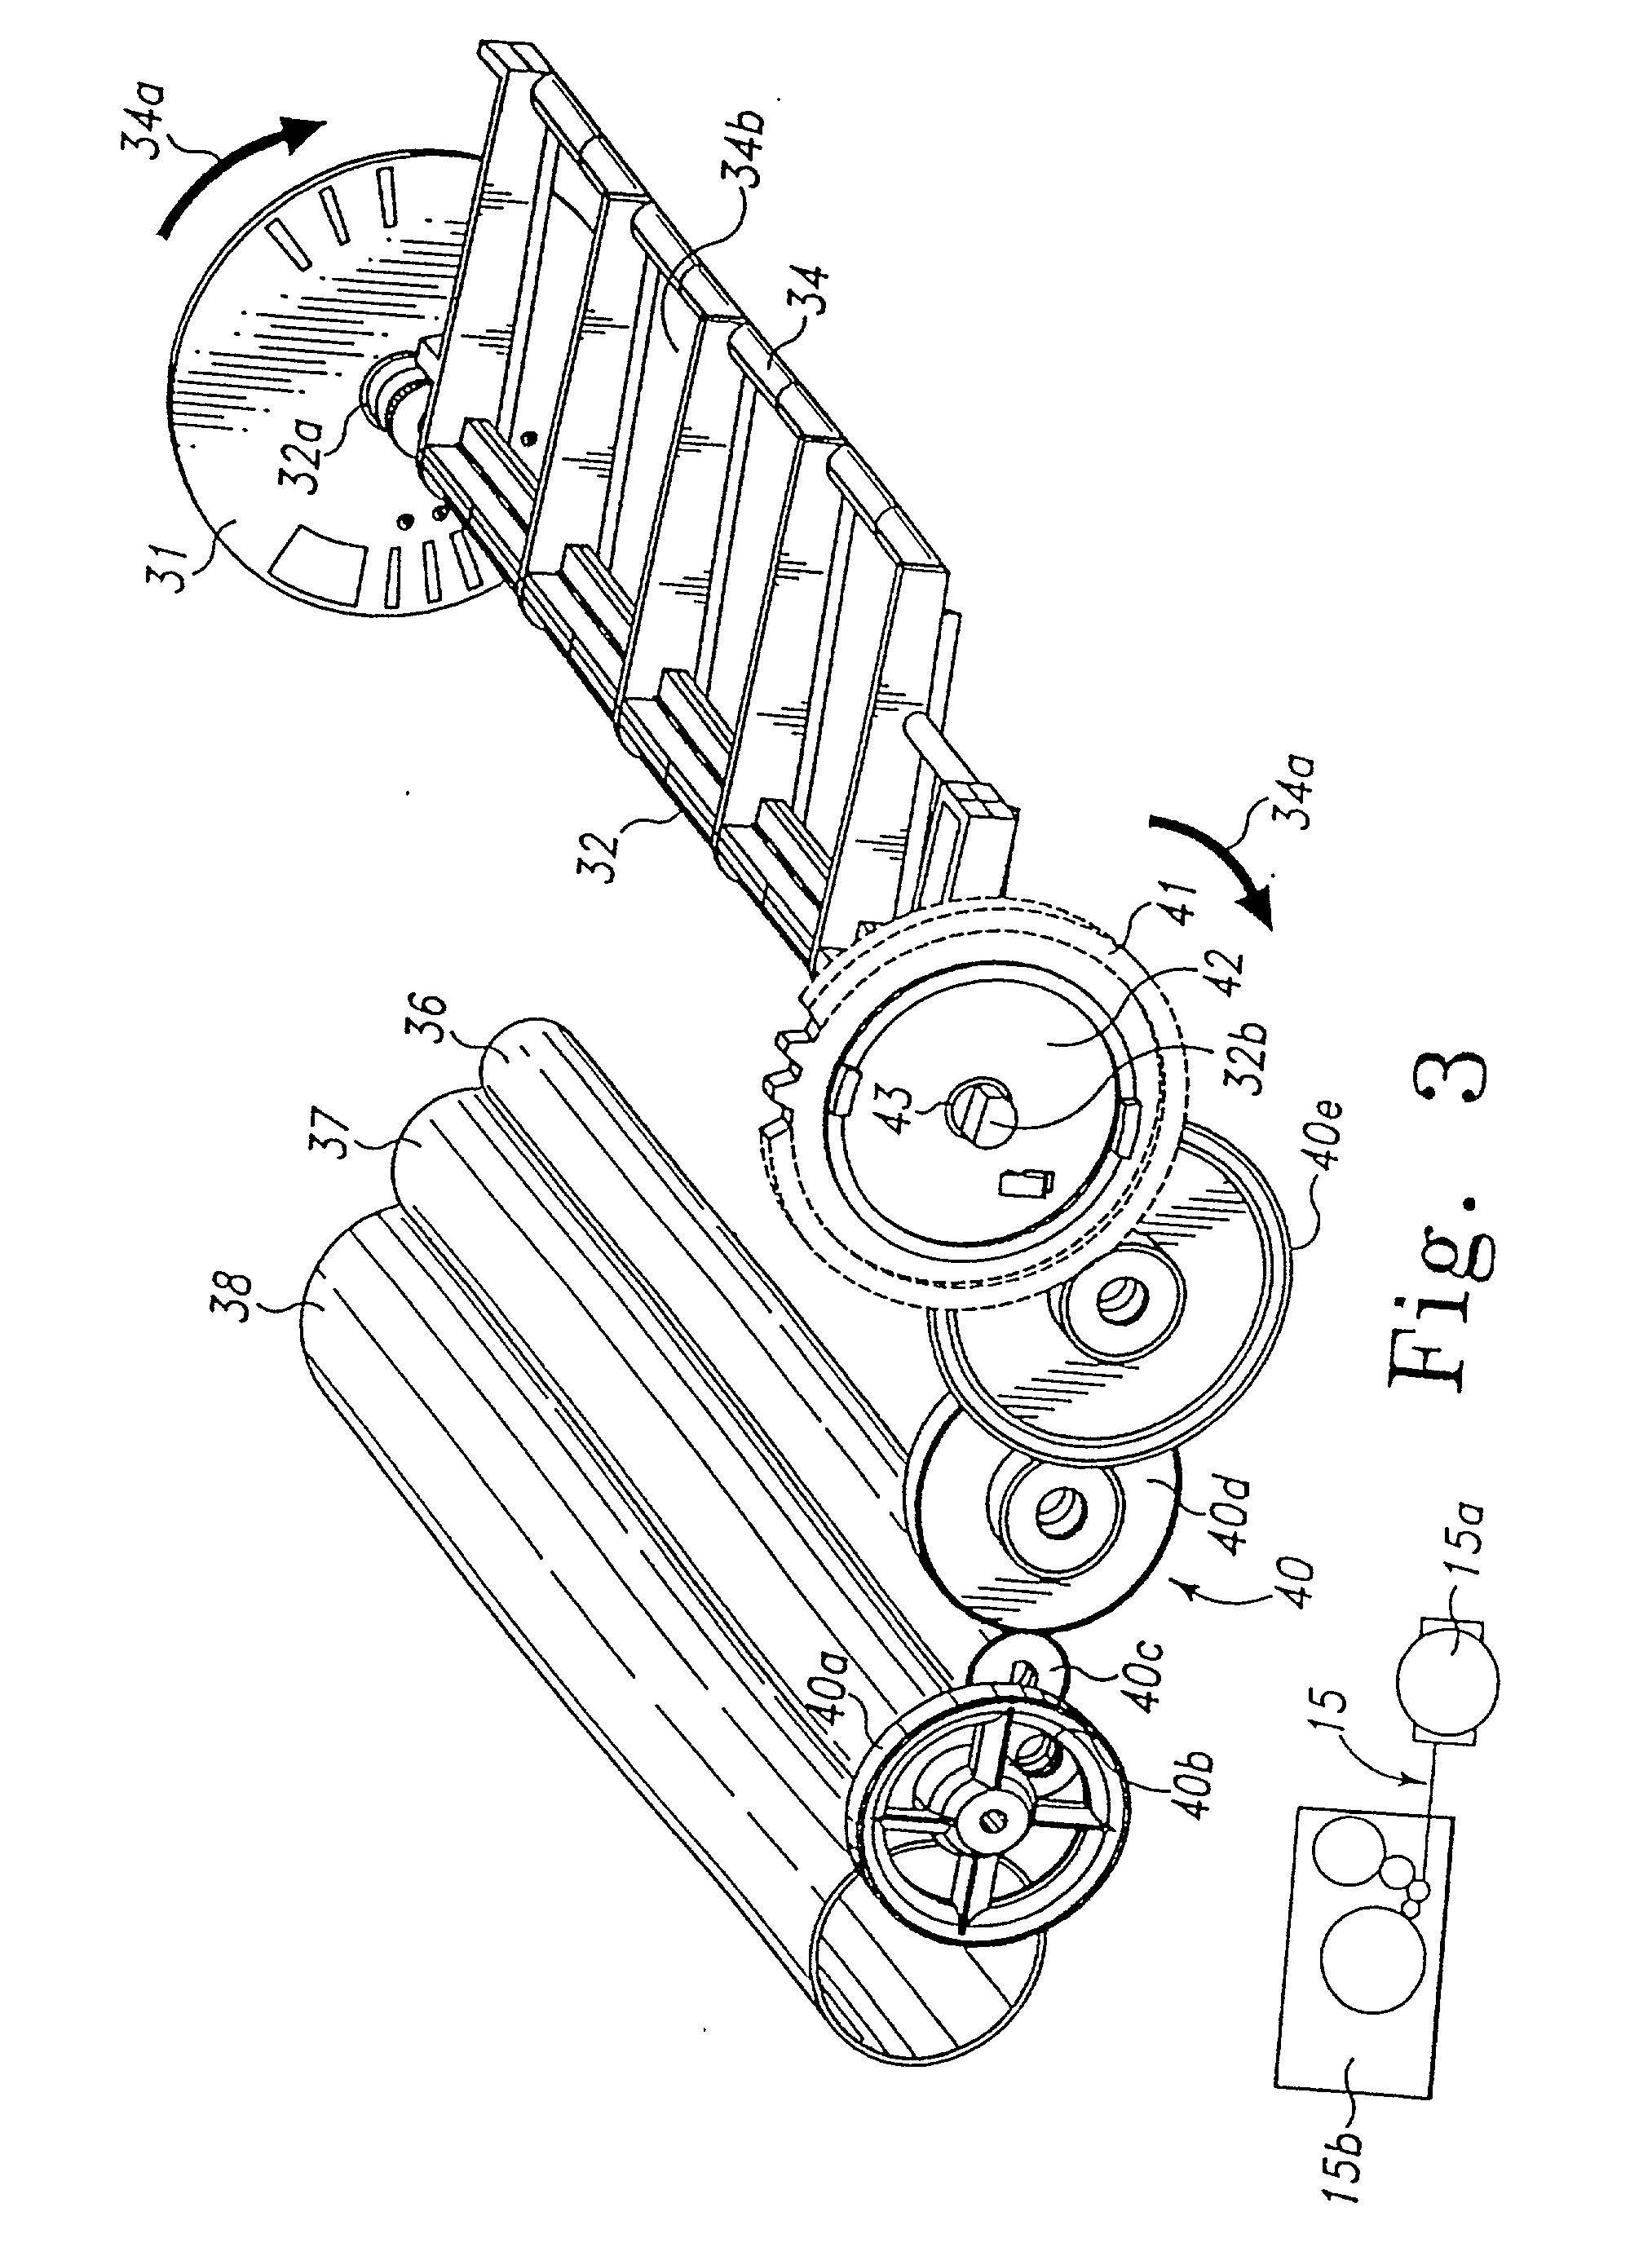 Encoded device for a toner cartridge